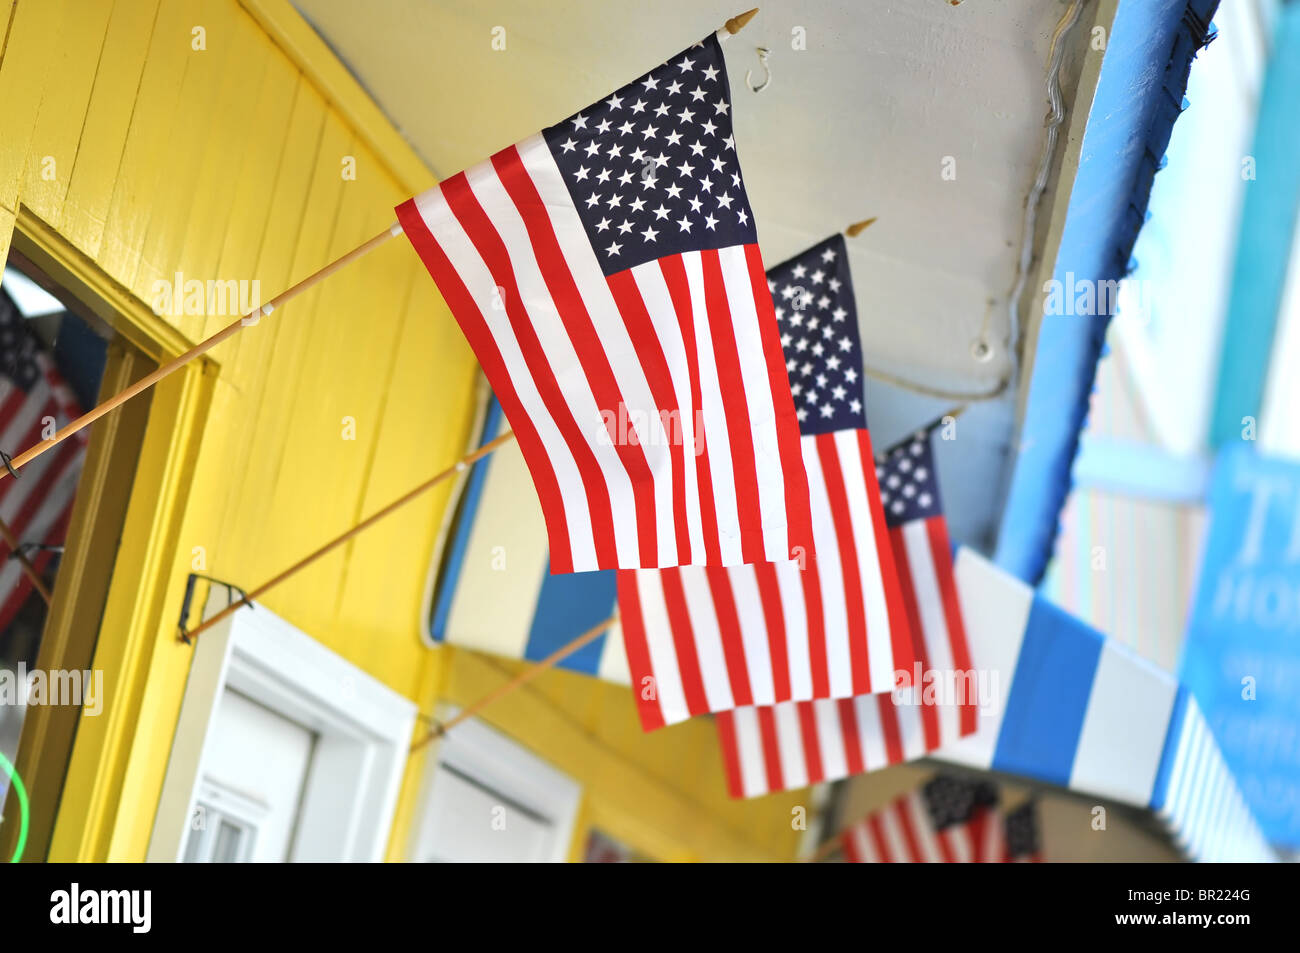 Colorful store front with three American flags flying. Stock Photo